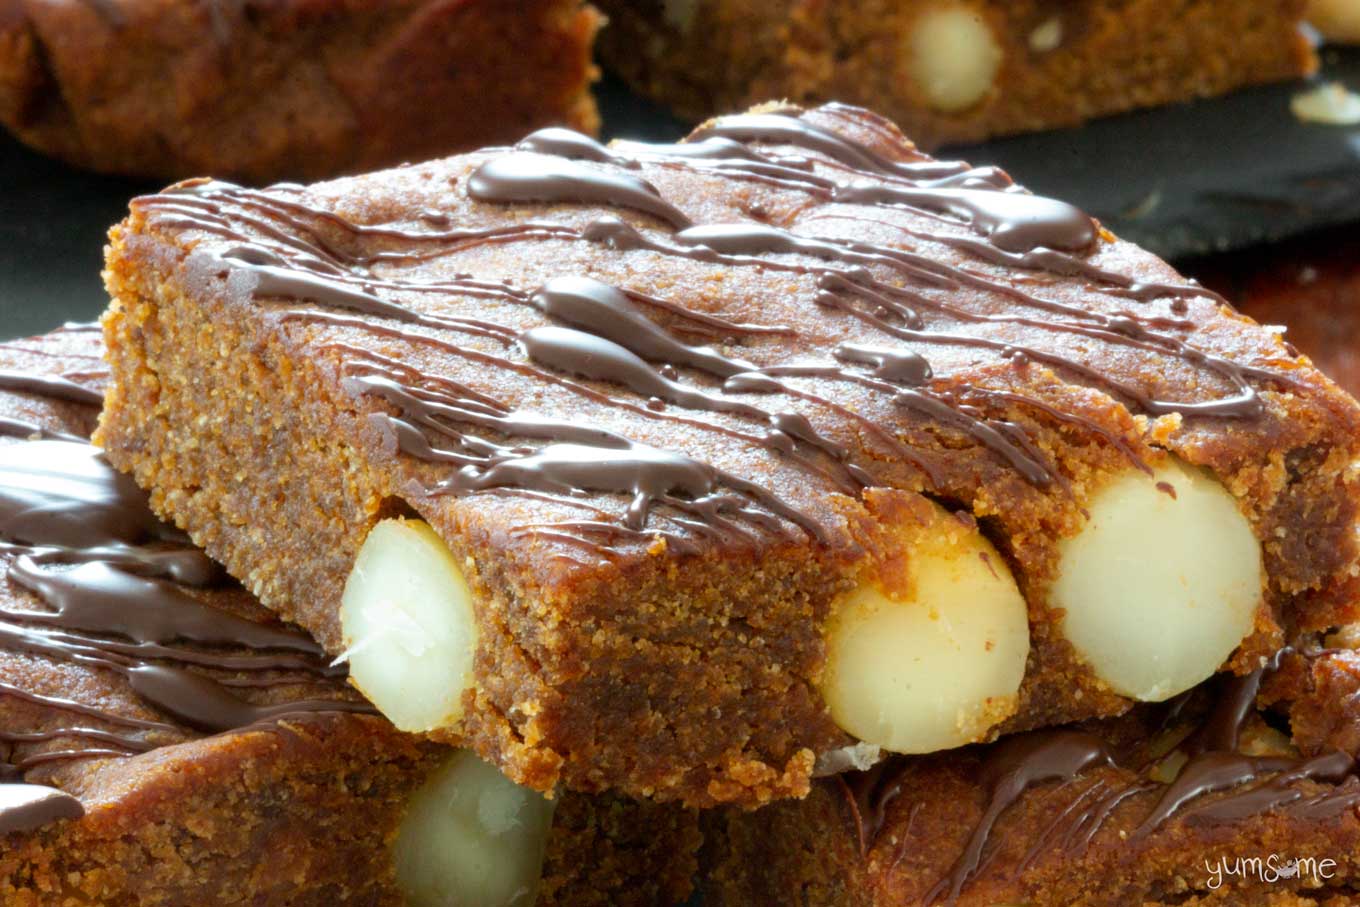 A chocolate-topped vegan cookie butter blondie, showing macadamias inside.